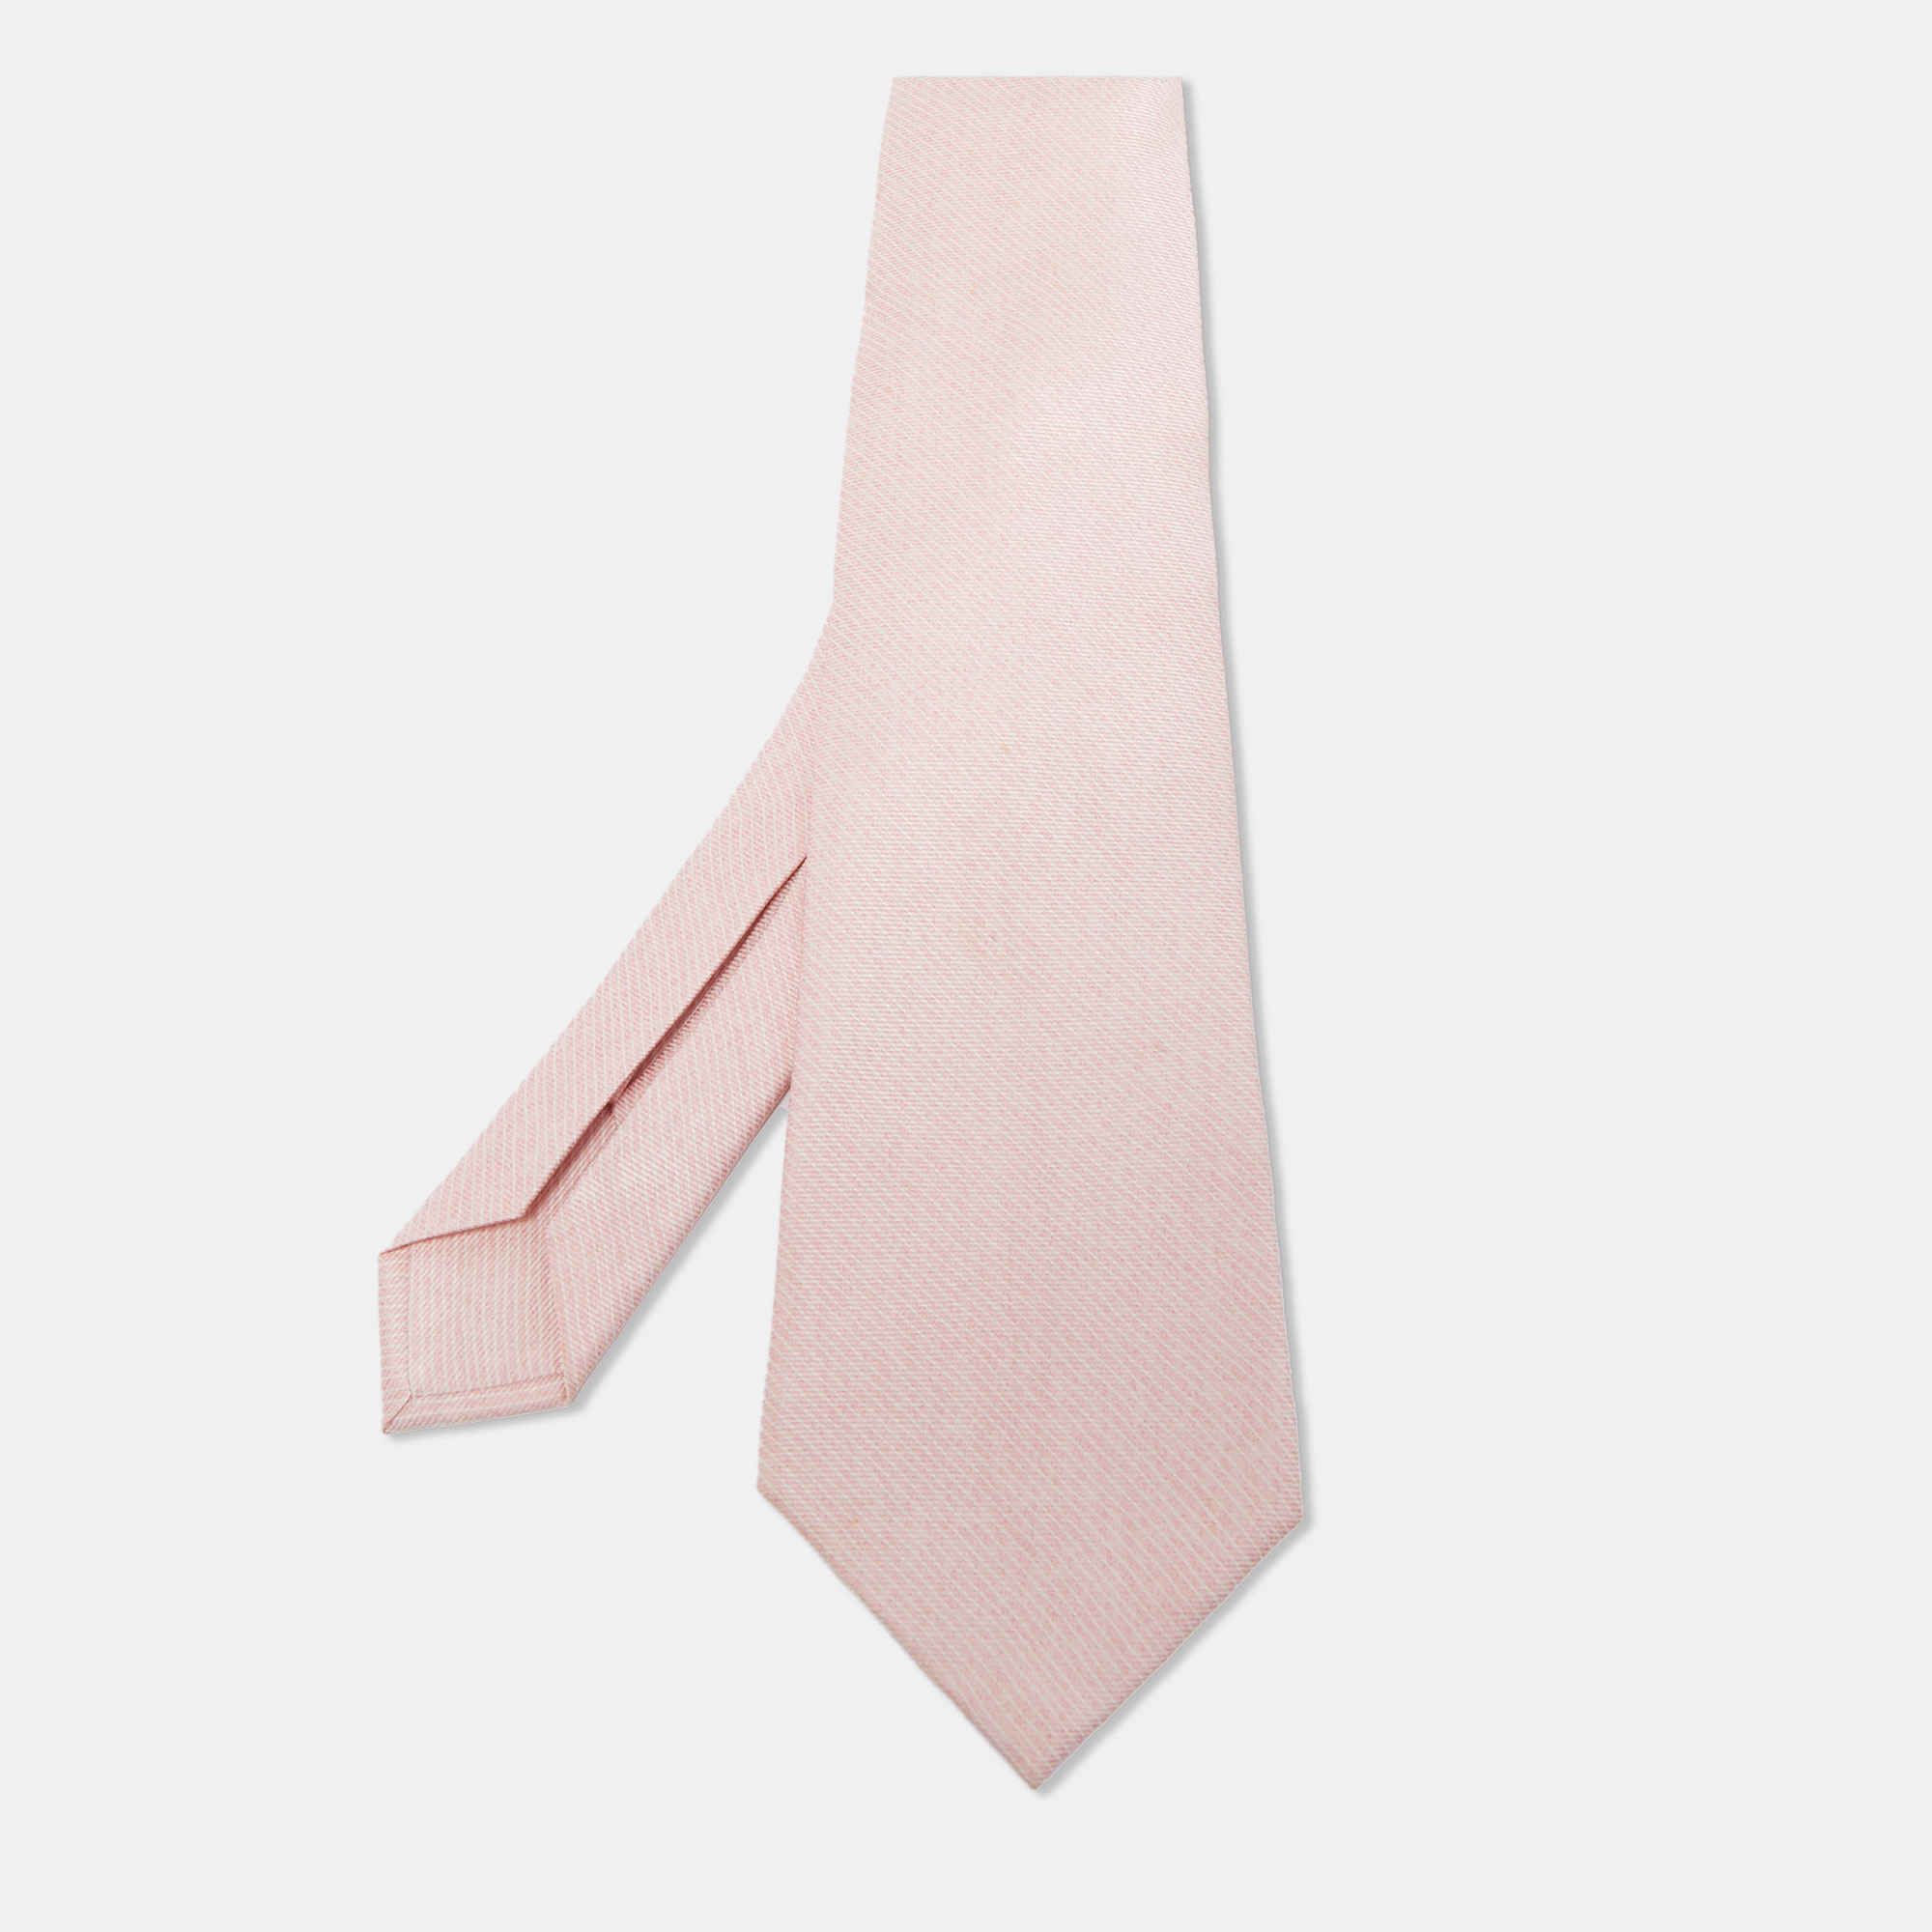 Pick this Bvlgari tie to give your formal look a touch of luxury. It is cut from silk and detailed with stripes all over. It is finished with the brand label and care label at the back.